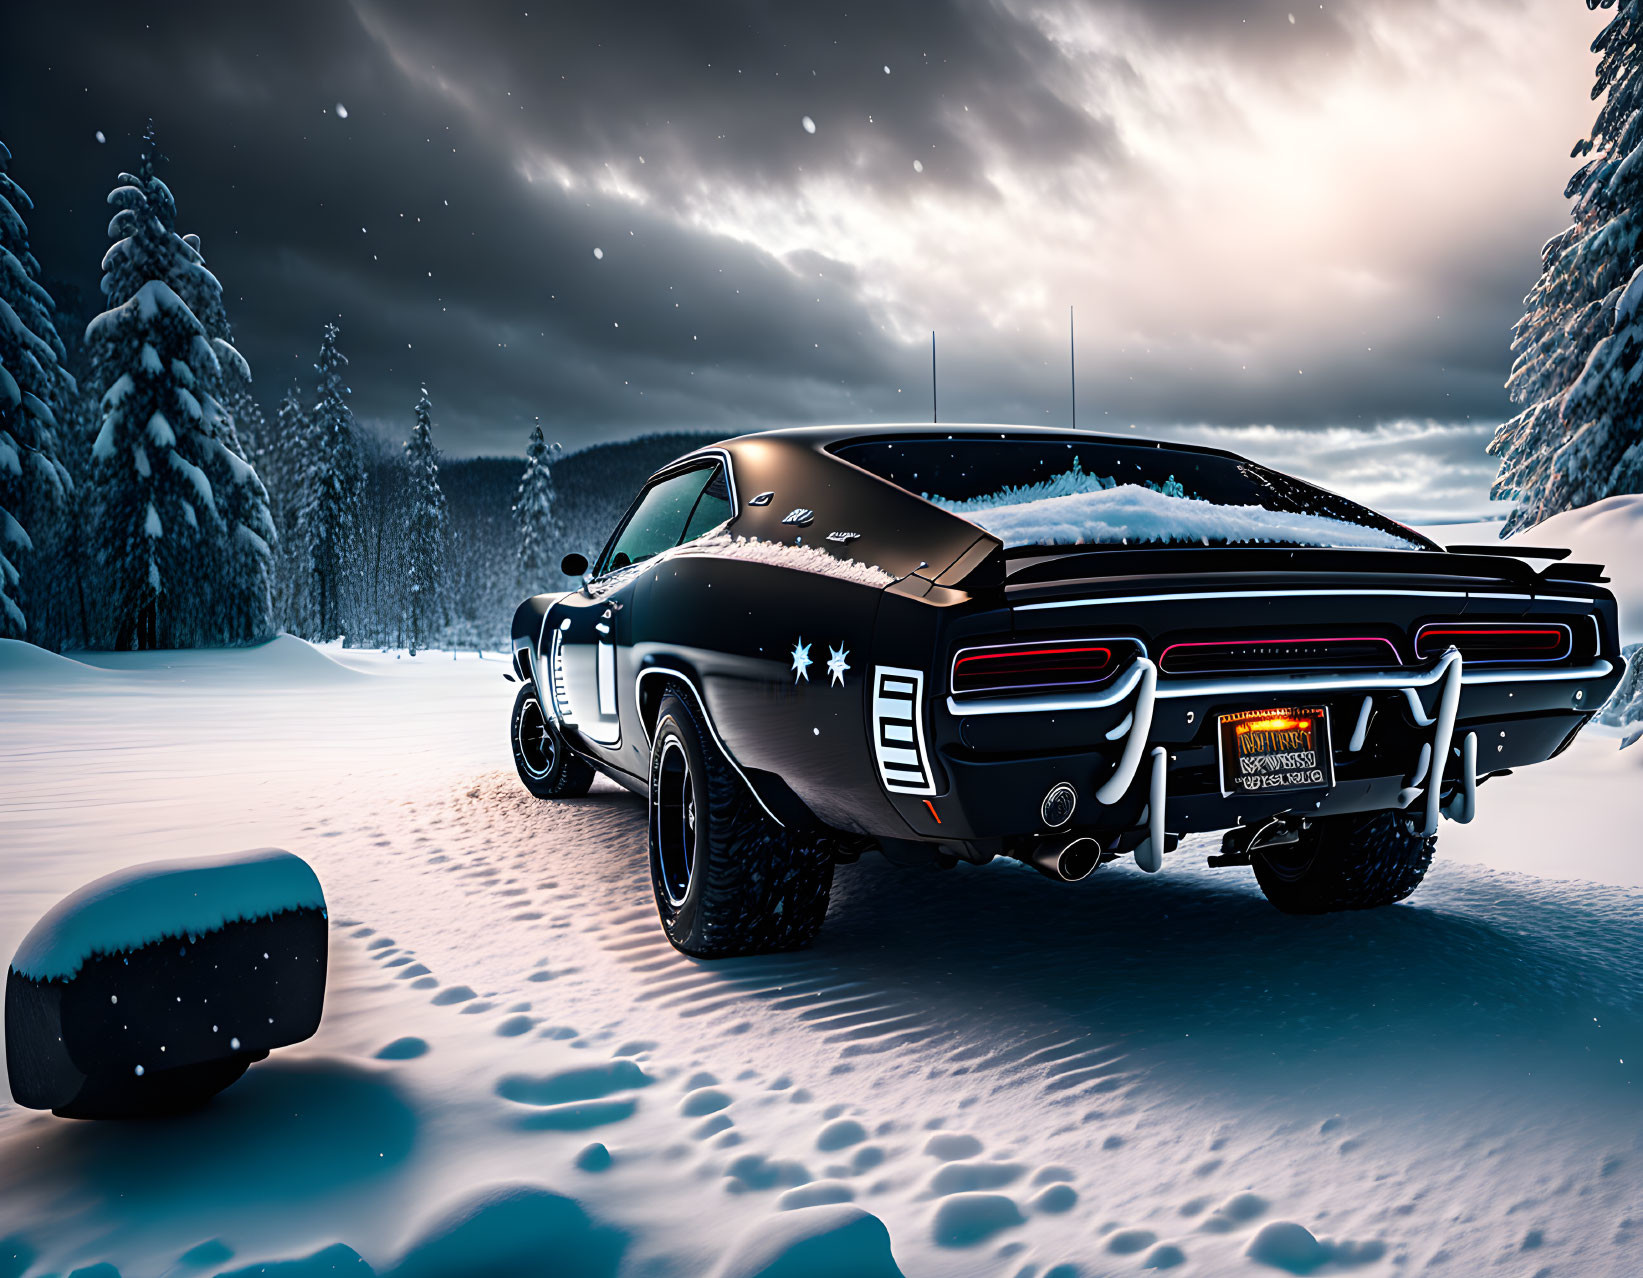 Classic muscle car in snow-covered night scene